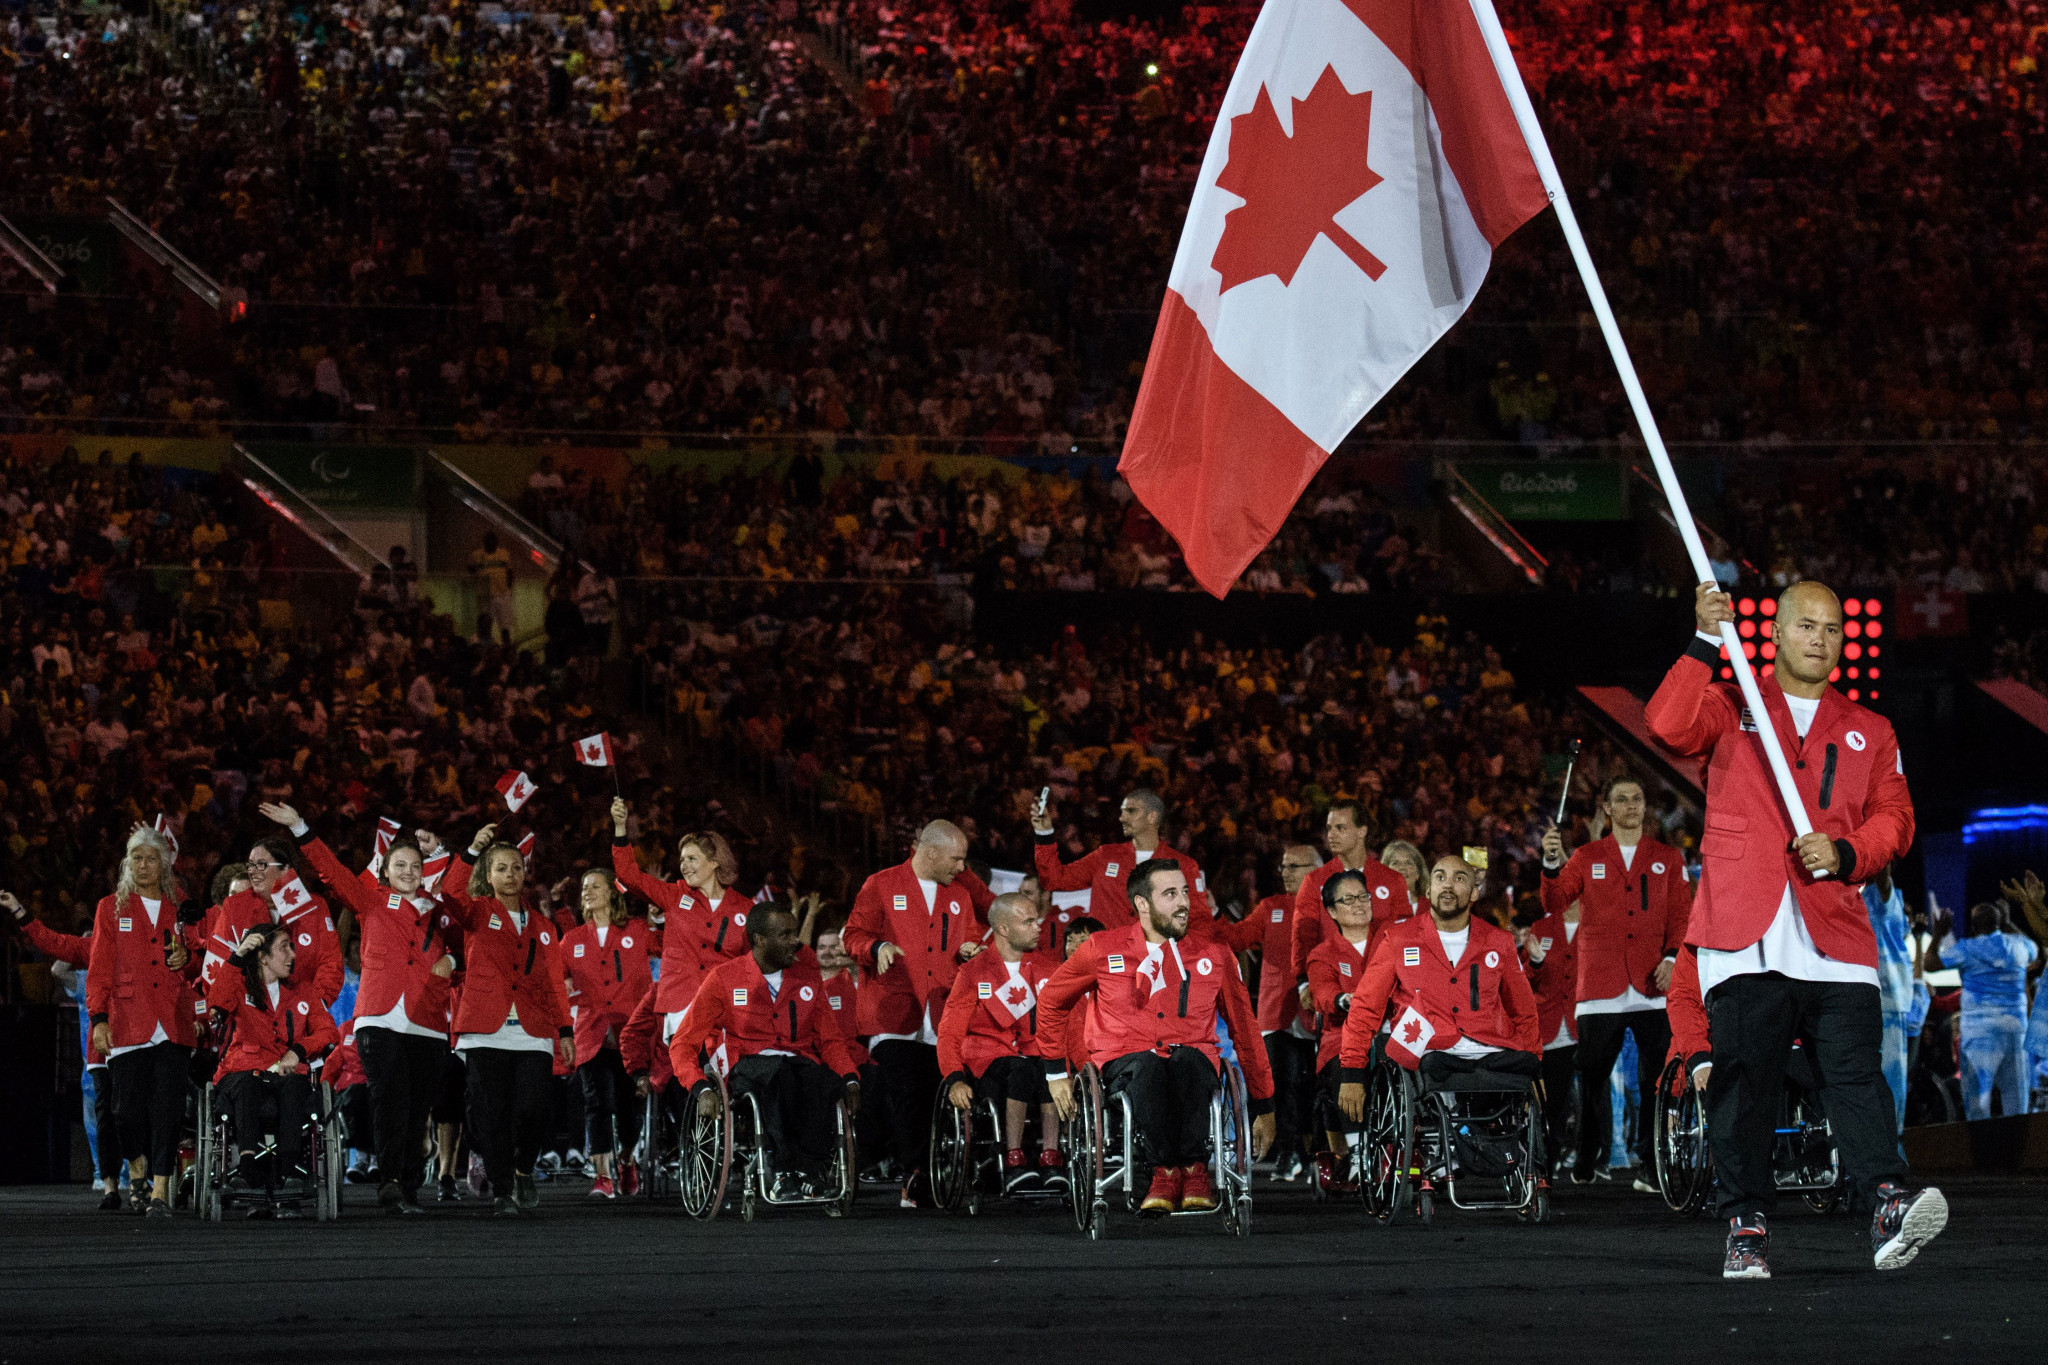 Stephanie Dixon will lead the Canadian team at the 2020 Paralympic Games in Tokyo and at the Lima 2019 Parapan American Games ©Getty Images